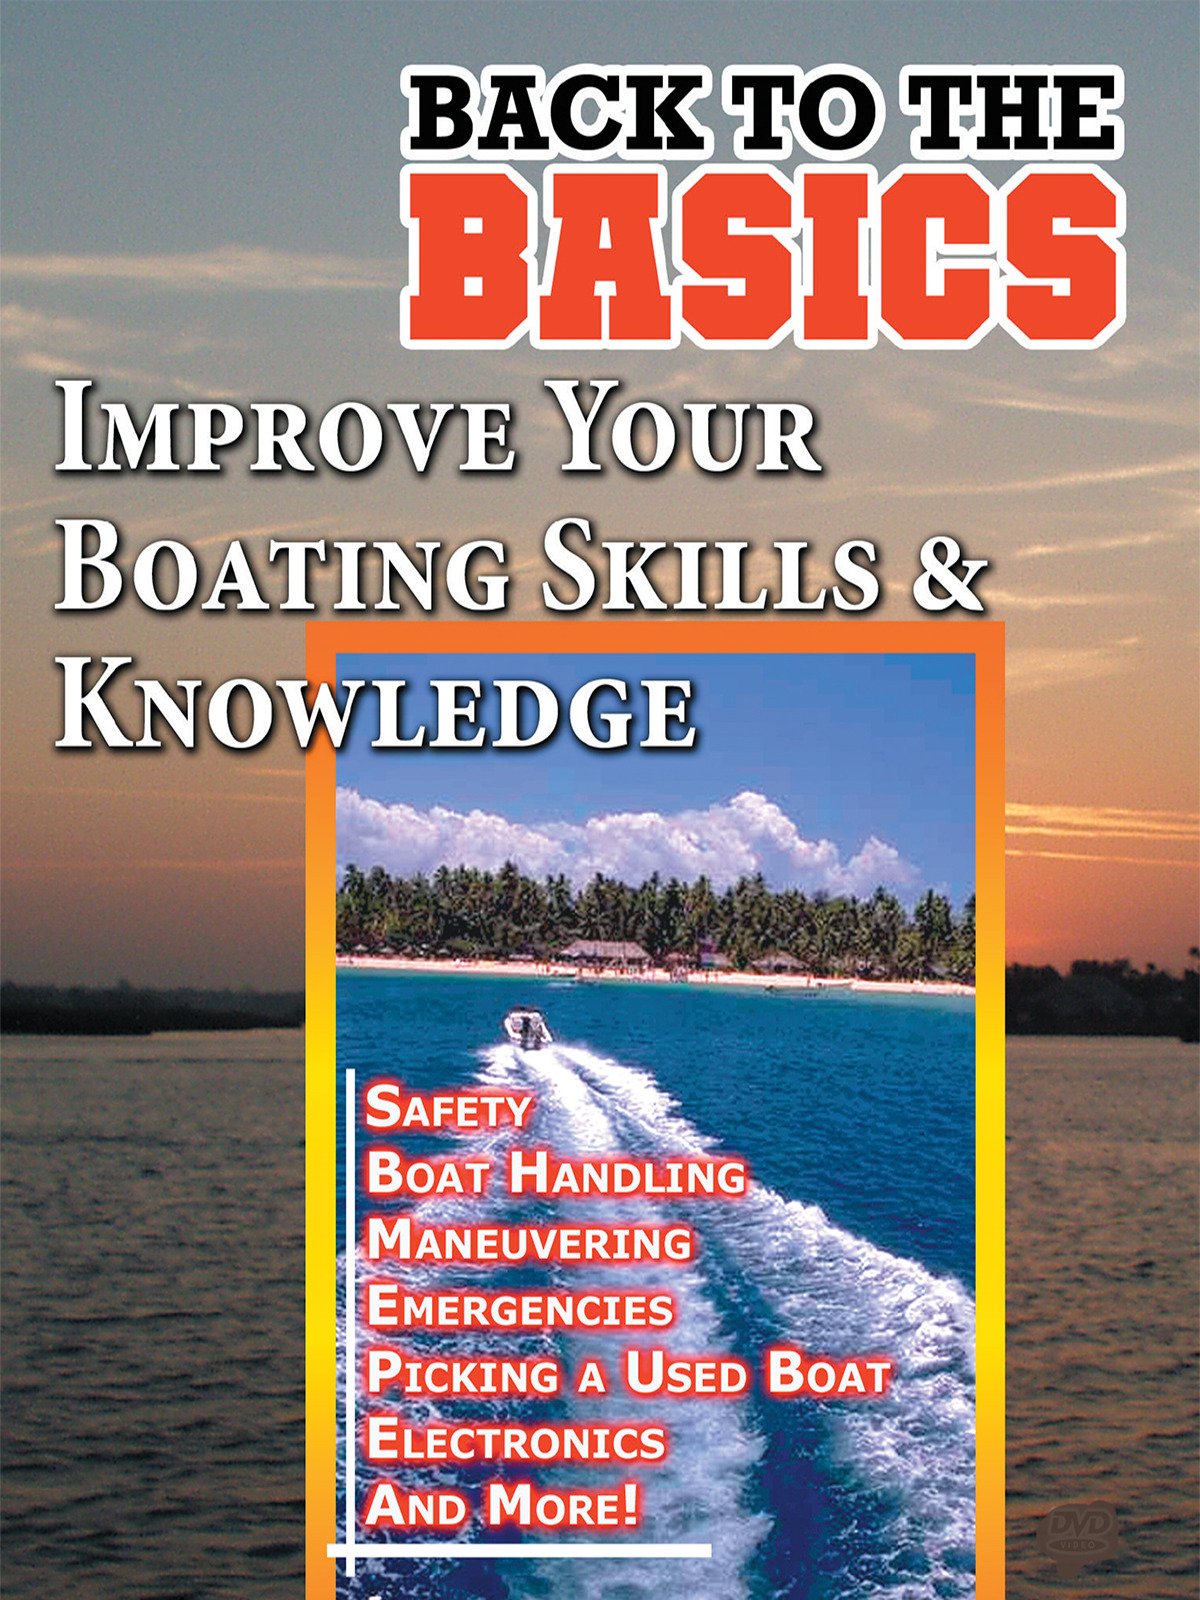 Improve Your Boating Skills & Knowledge - Back to the Basics